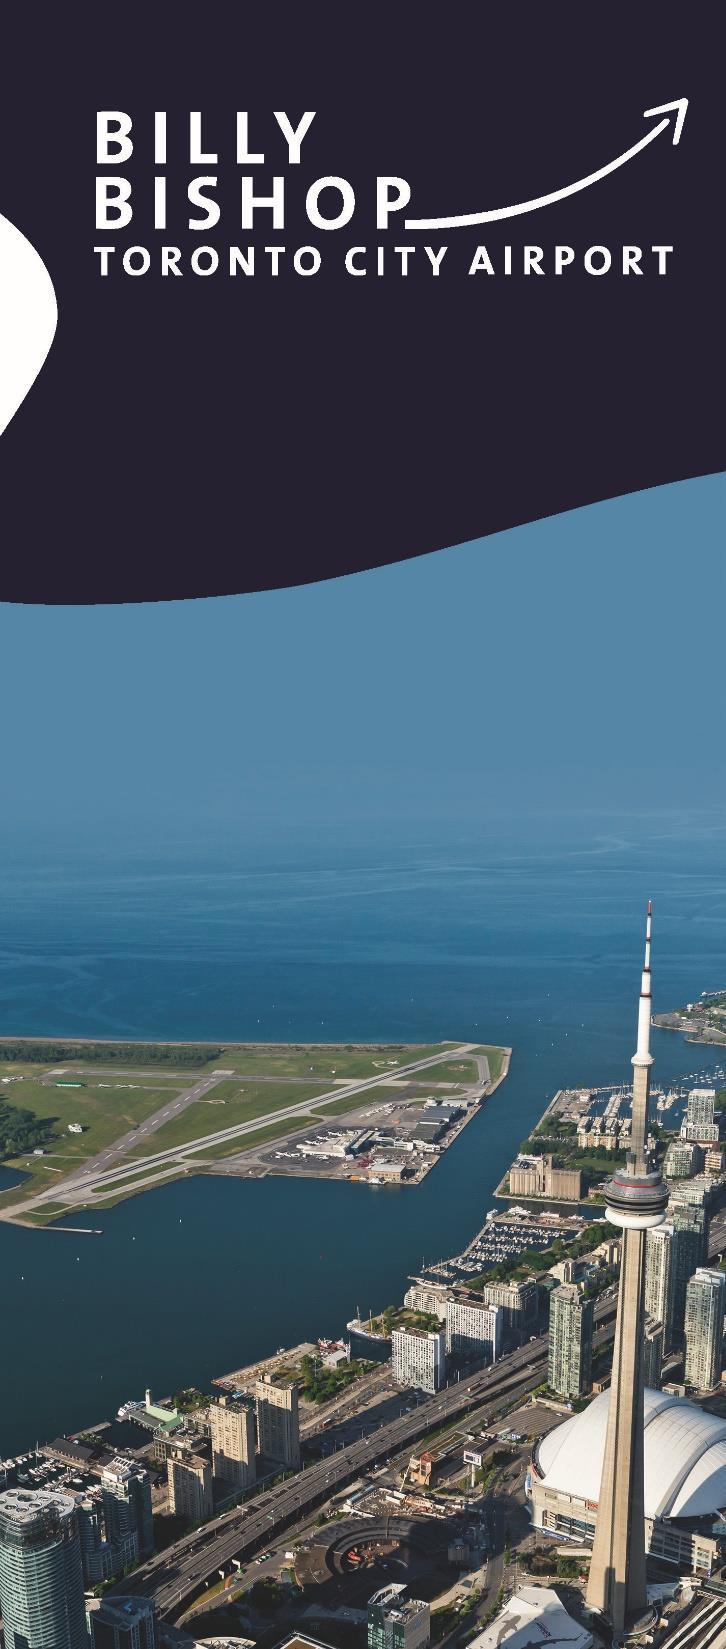 Billy Bishop Toronto City Airport Served 2.8 million passengers in 2017. Generated revenue of $48.4 million, including $21 million in Airport Improvement Fees (AIF).